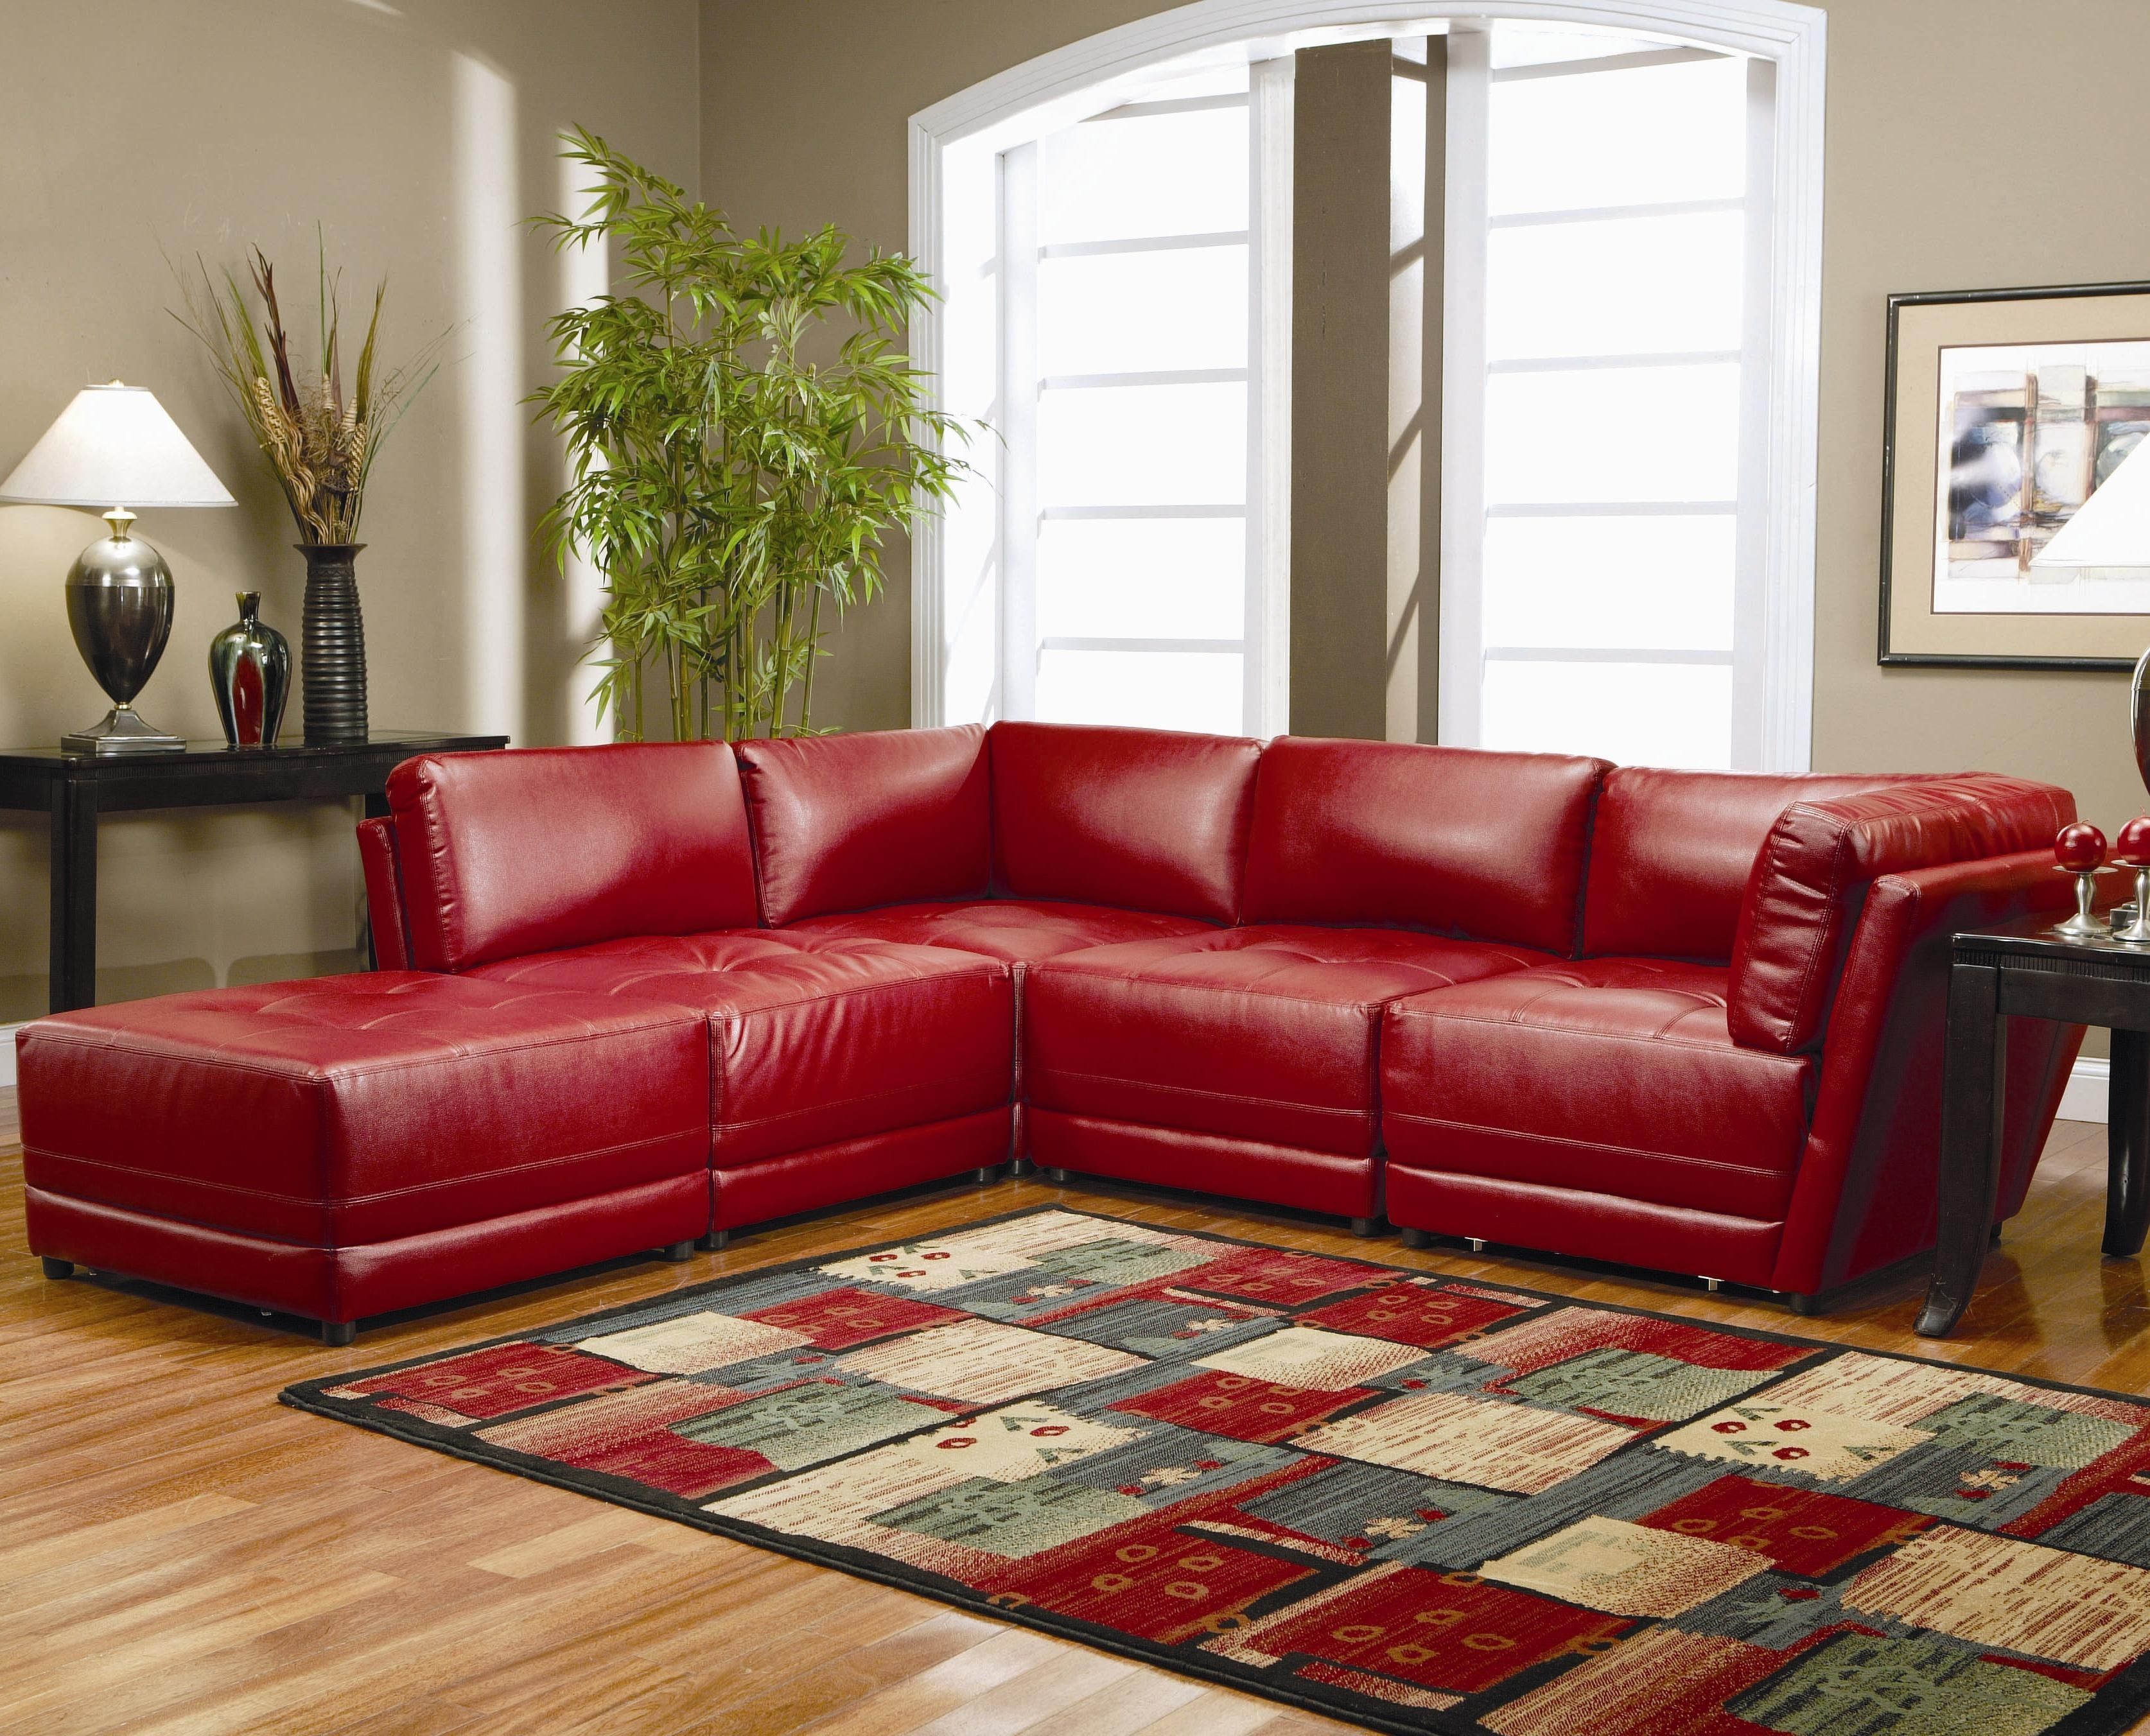 Warm Red Leather Sectional L Shaped Sofa Design Ideas For Living Throughout Red Leather Sectionals With Chaise (View 14 of 15)